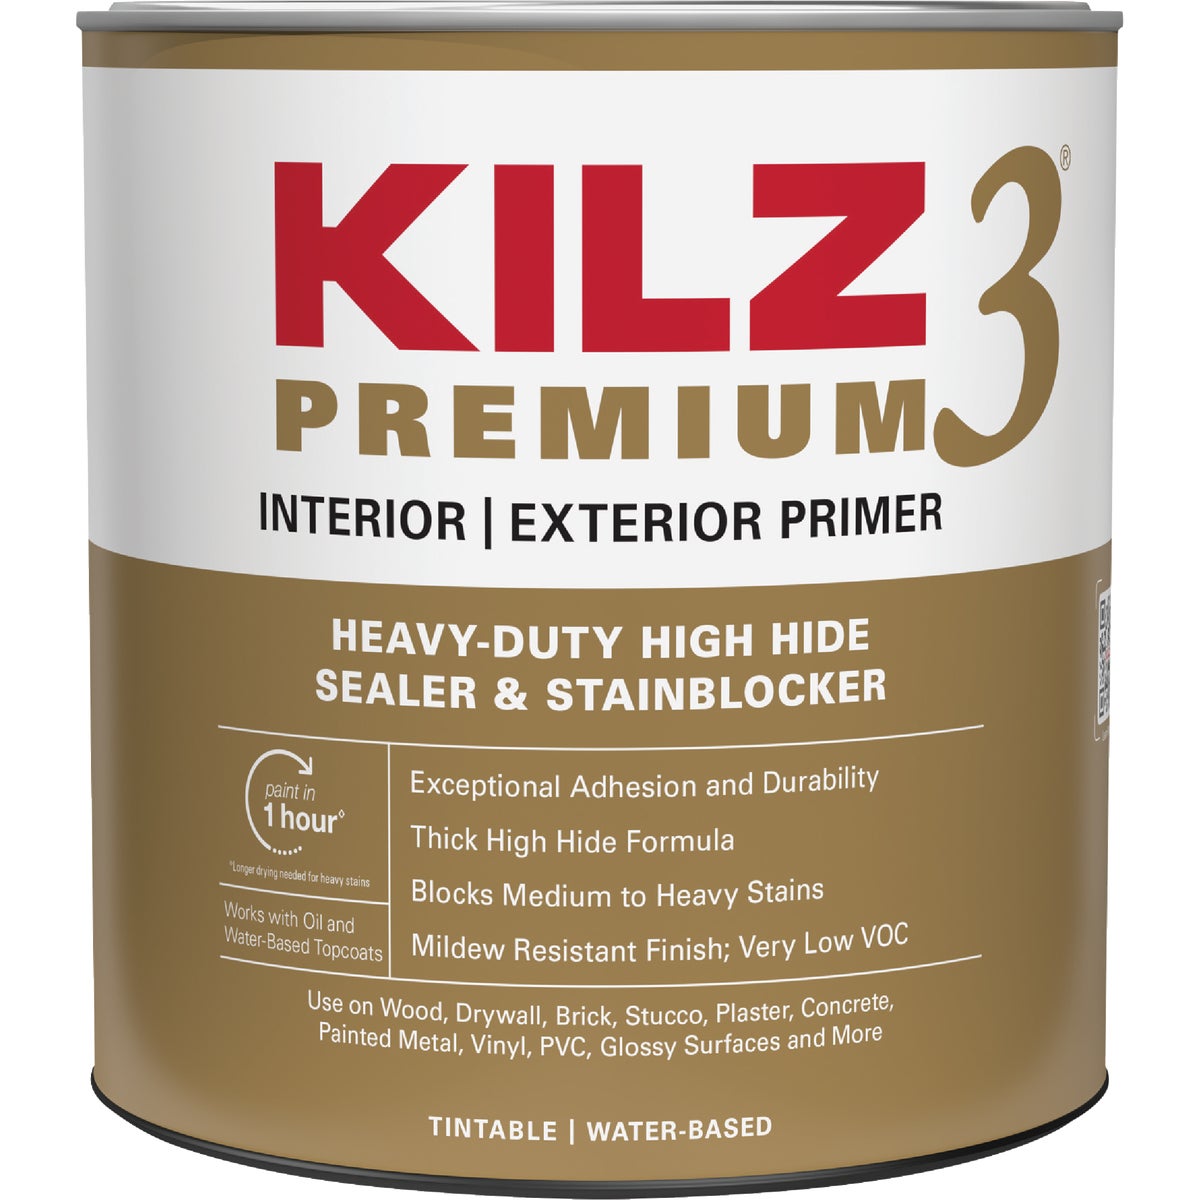 Item 798800, A superior quality fast drying, low odor, zero VOC water-base, primer-